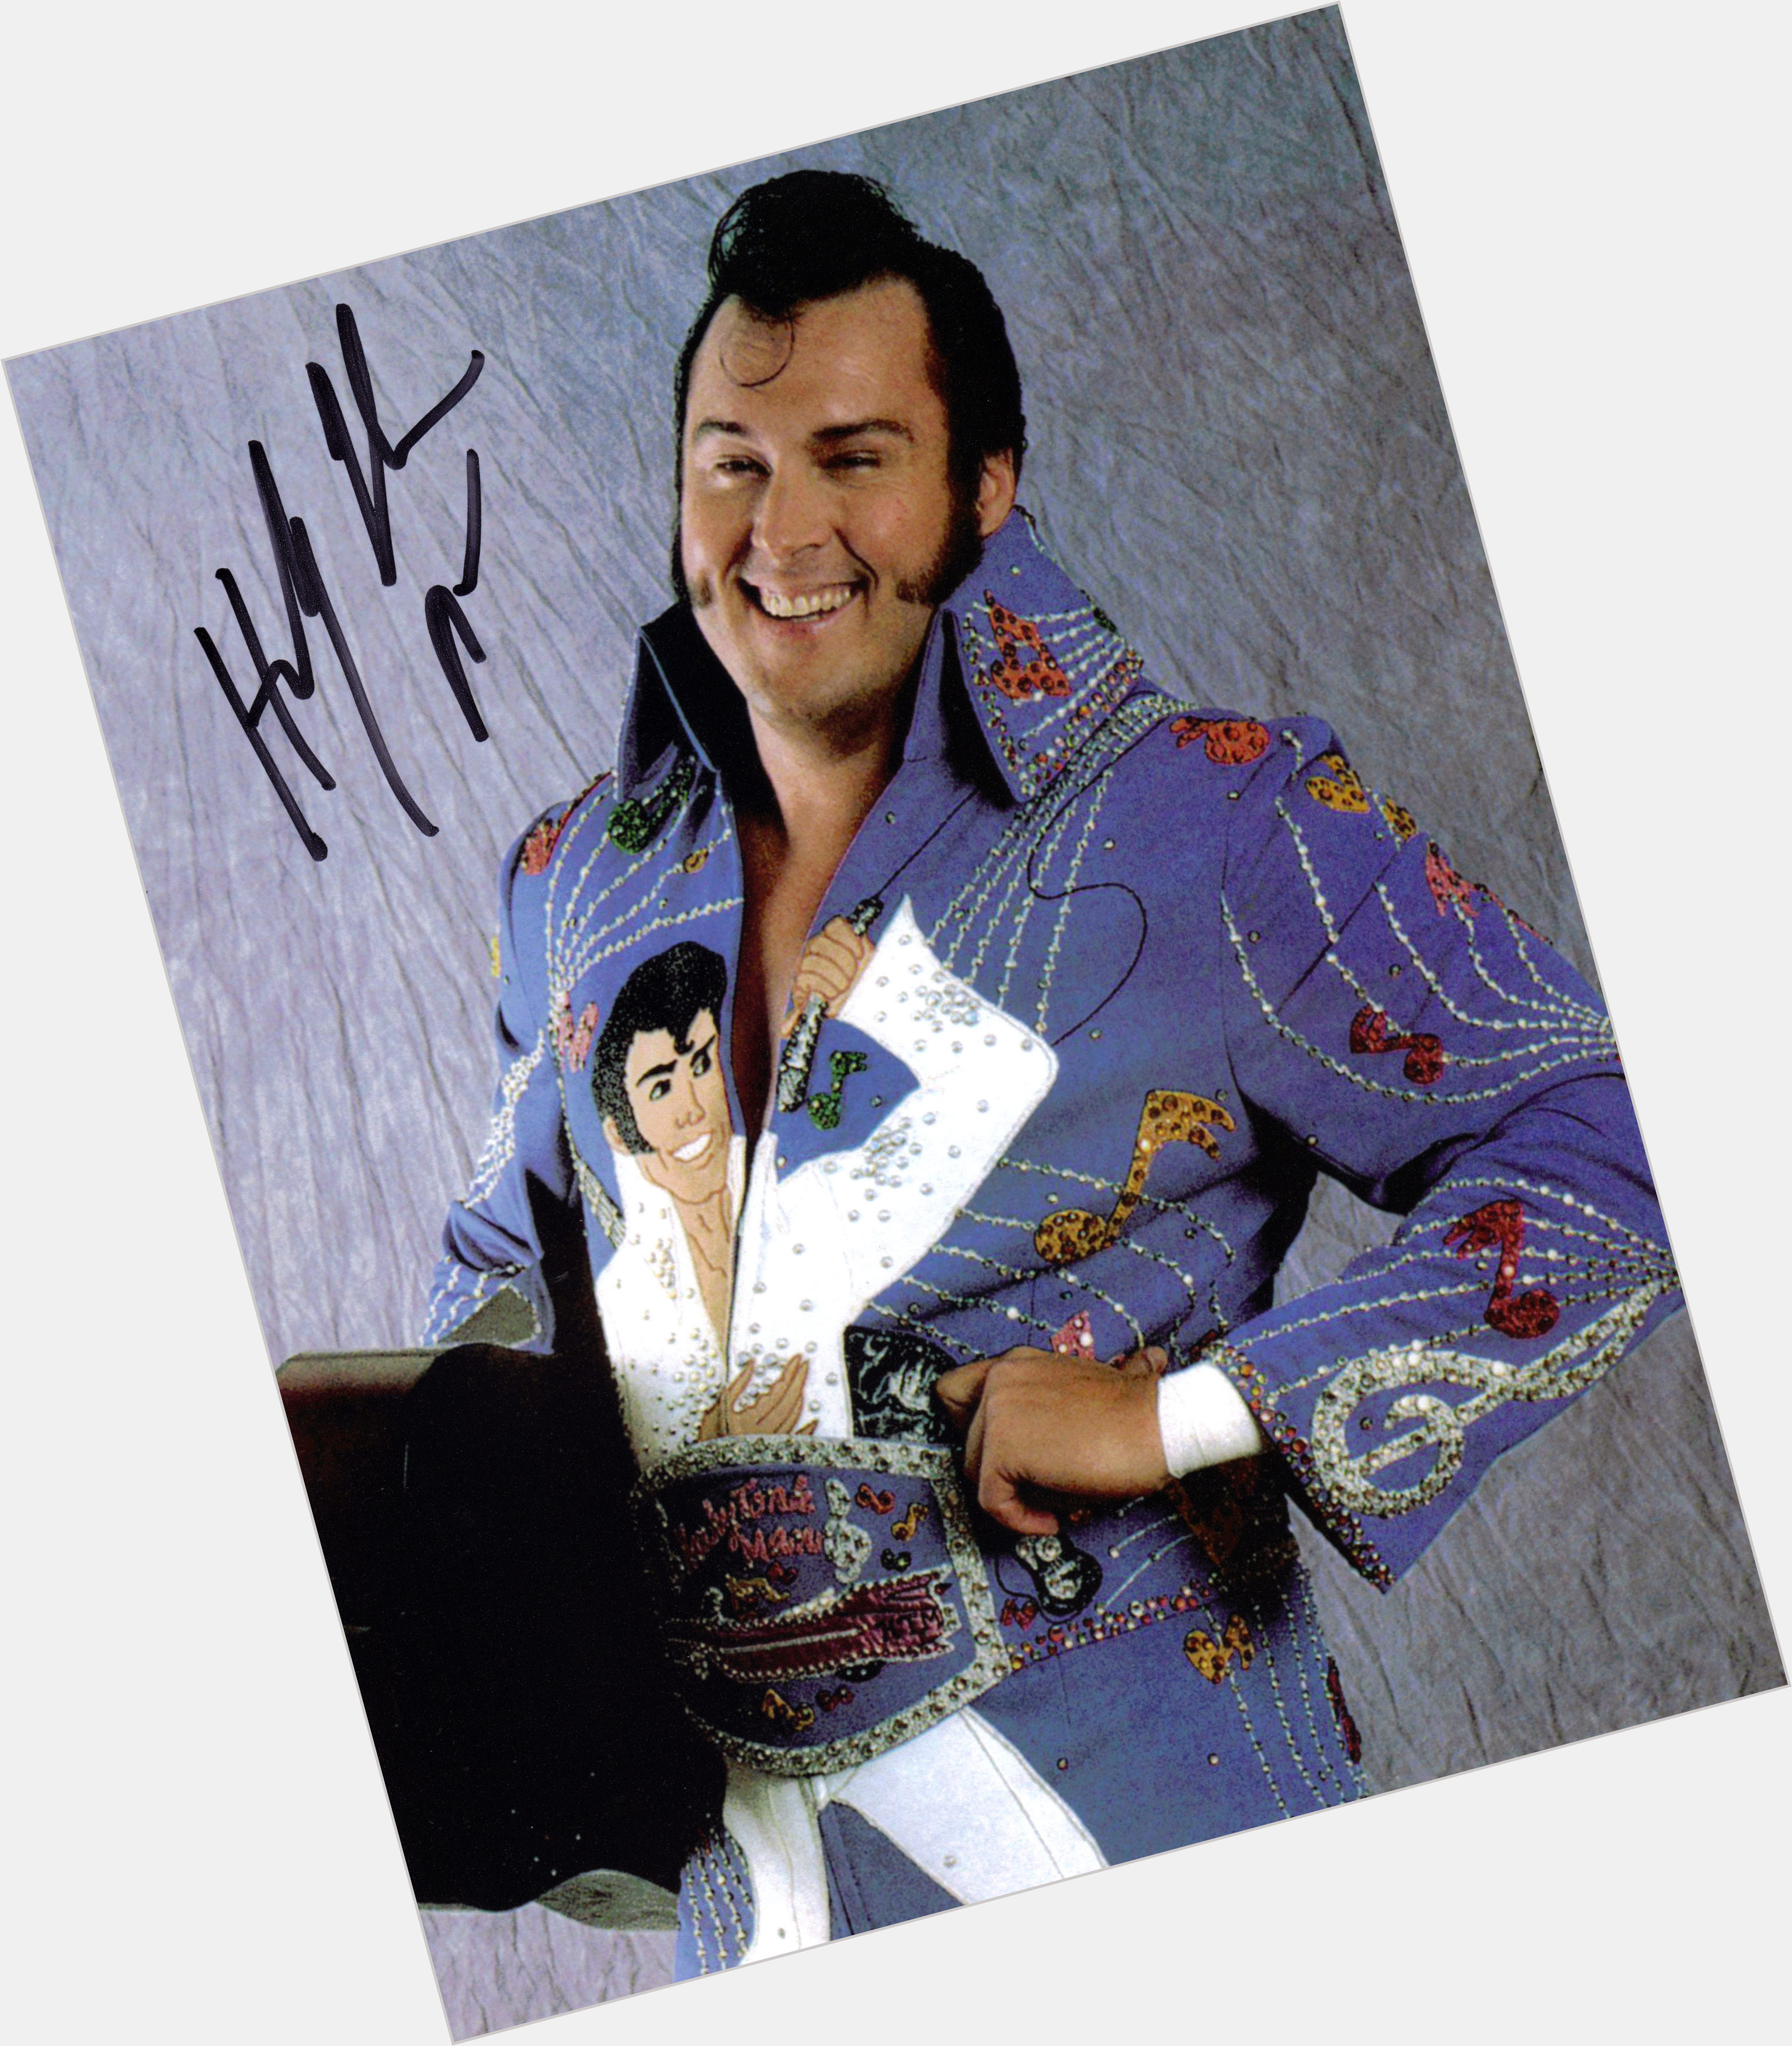 The Honky Tonk Man dating 2